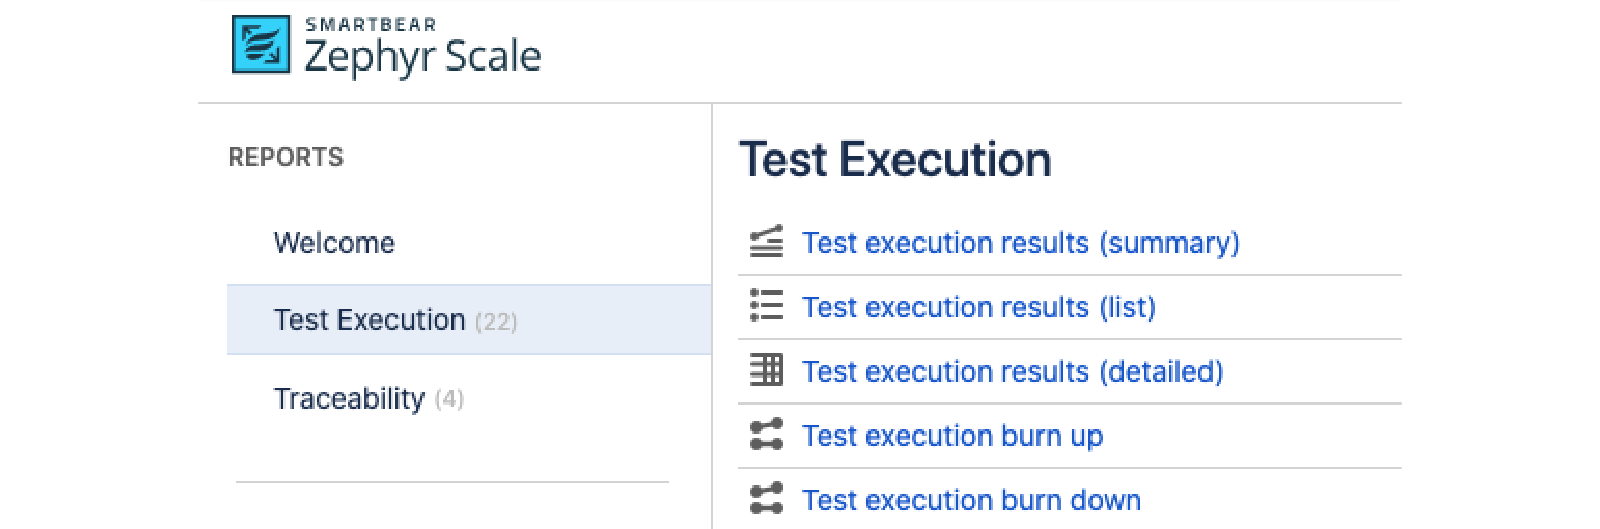 Test Execution tab in Zephyr Scale